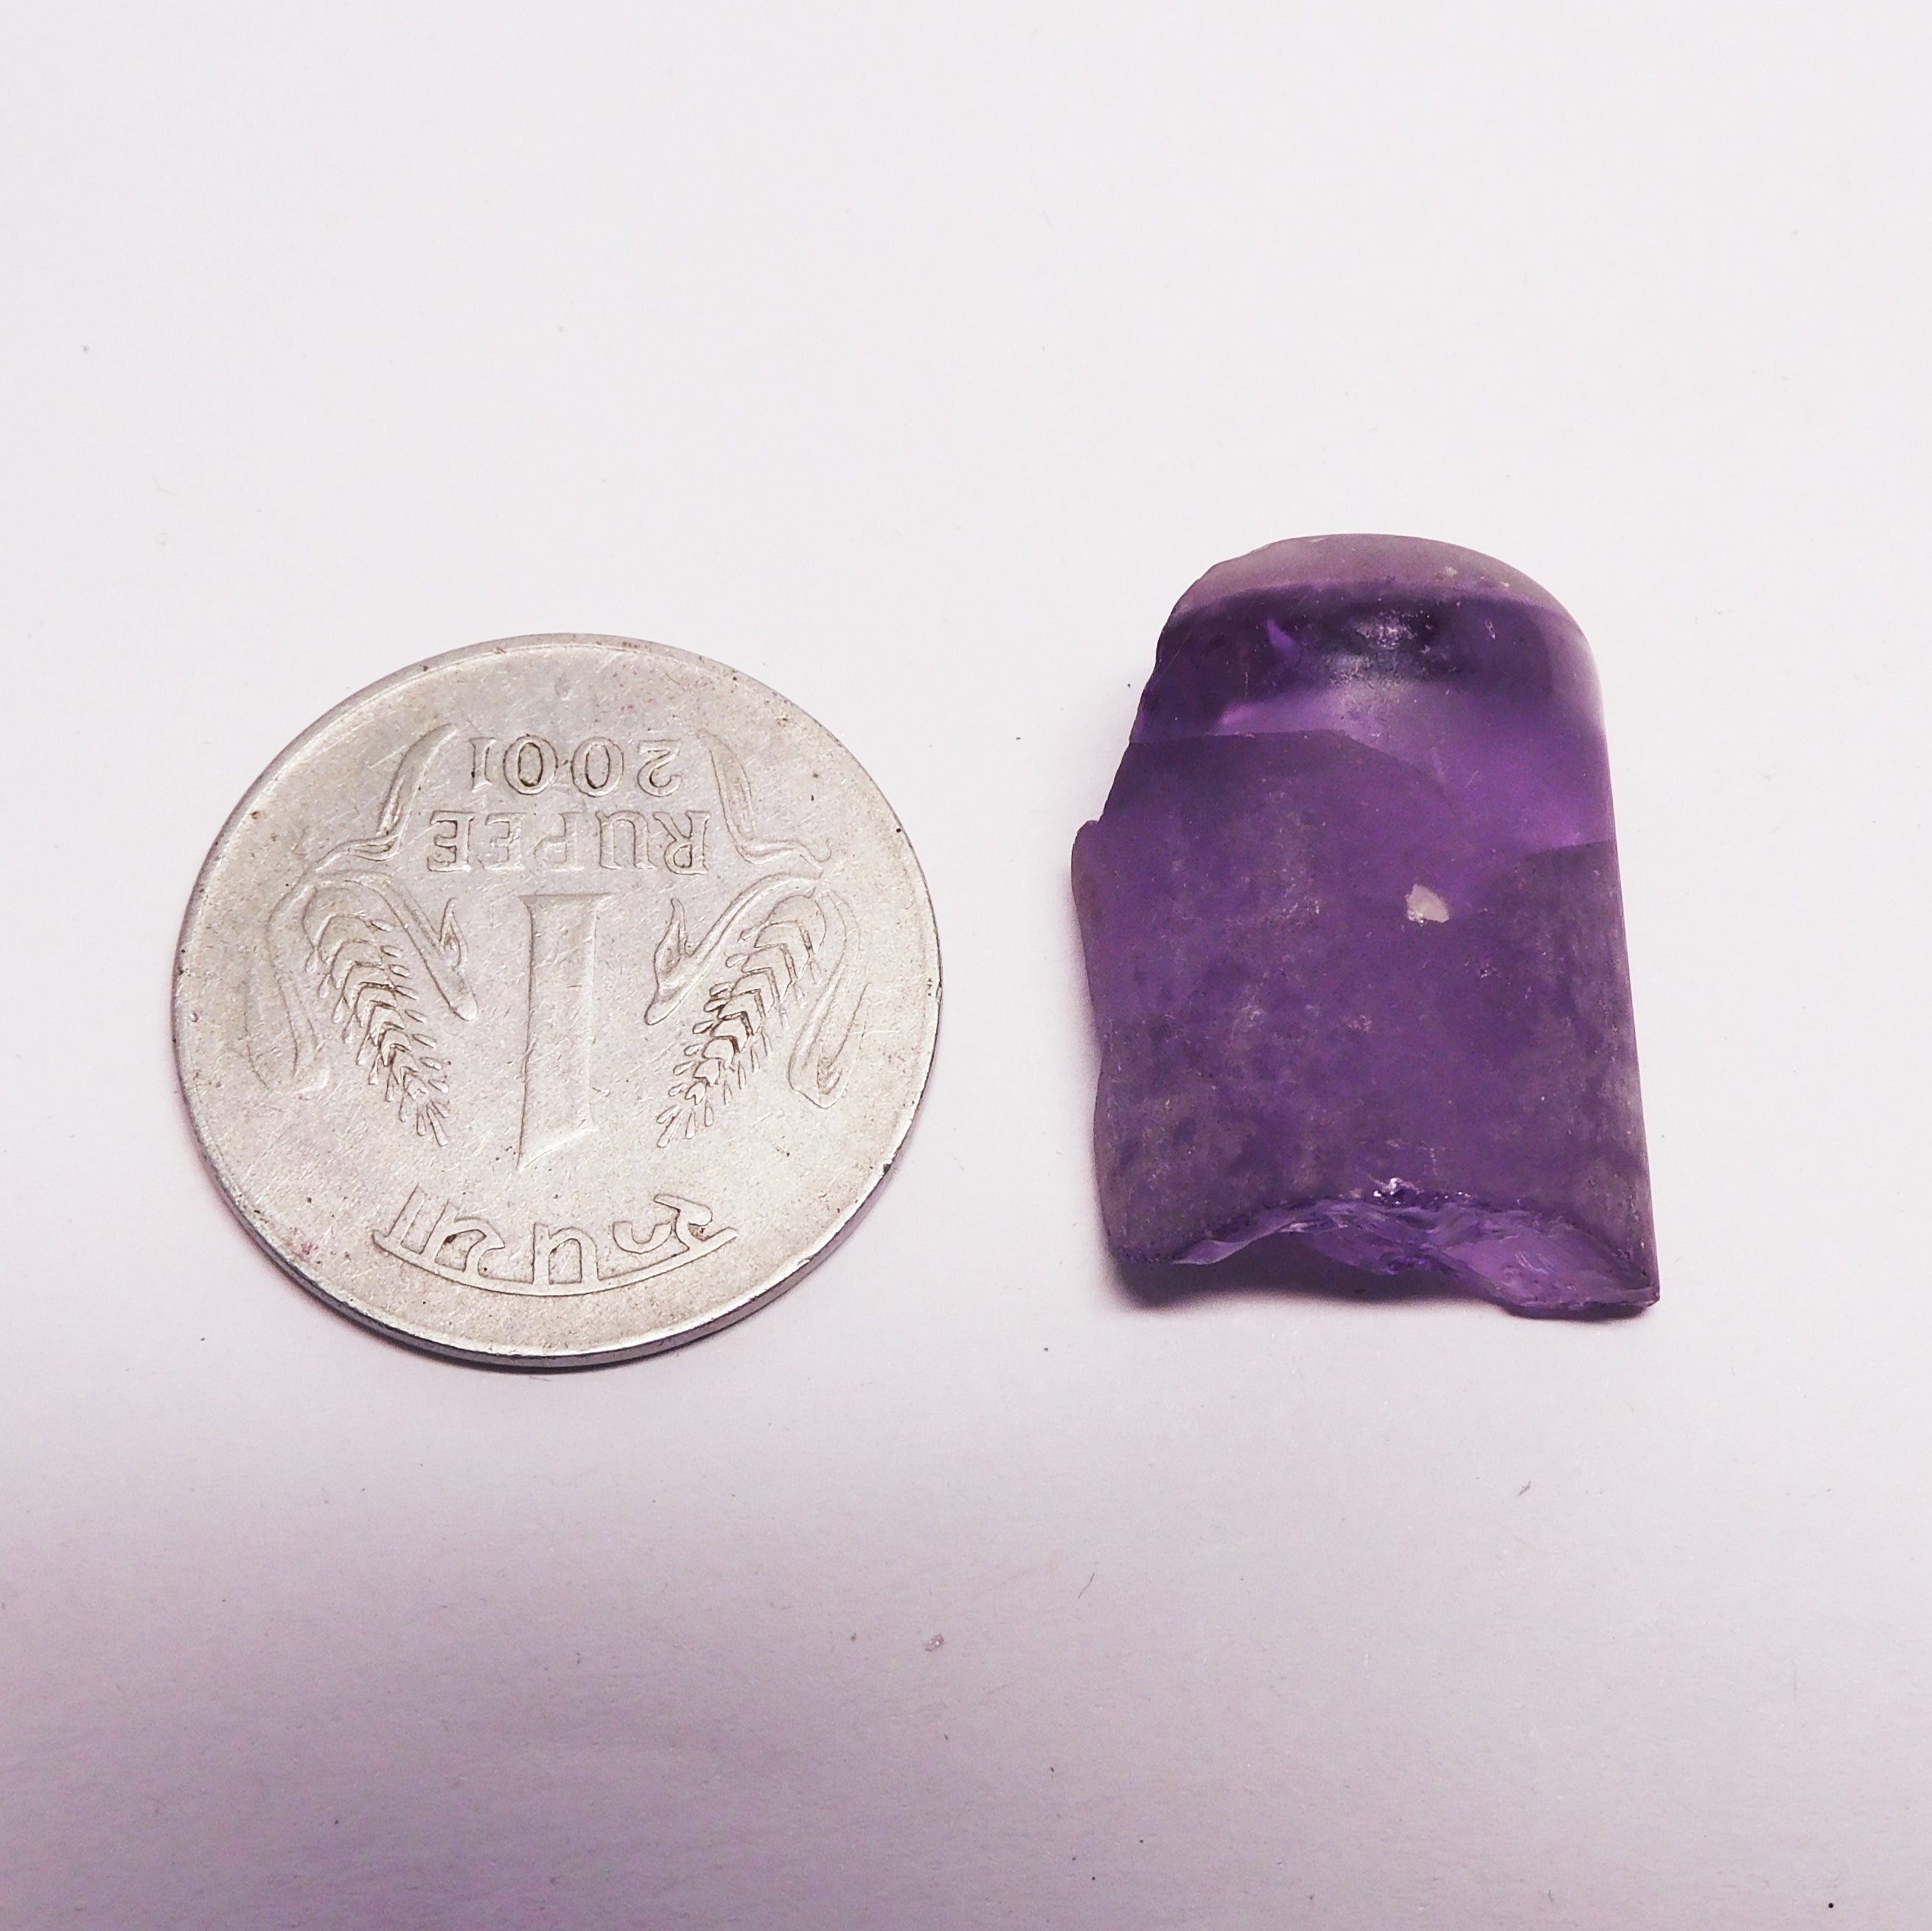 Beautiful Rough For Jwelery Making !! Natural Color Change Alexandrite Rough 47.10 Carat Certified Uncut Rough Loose Gemstone | Best Price | ON SALE